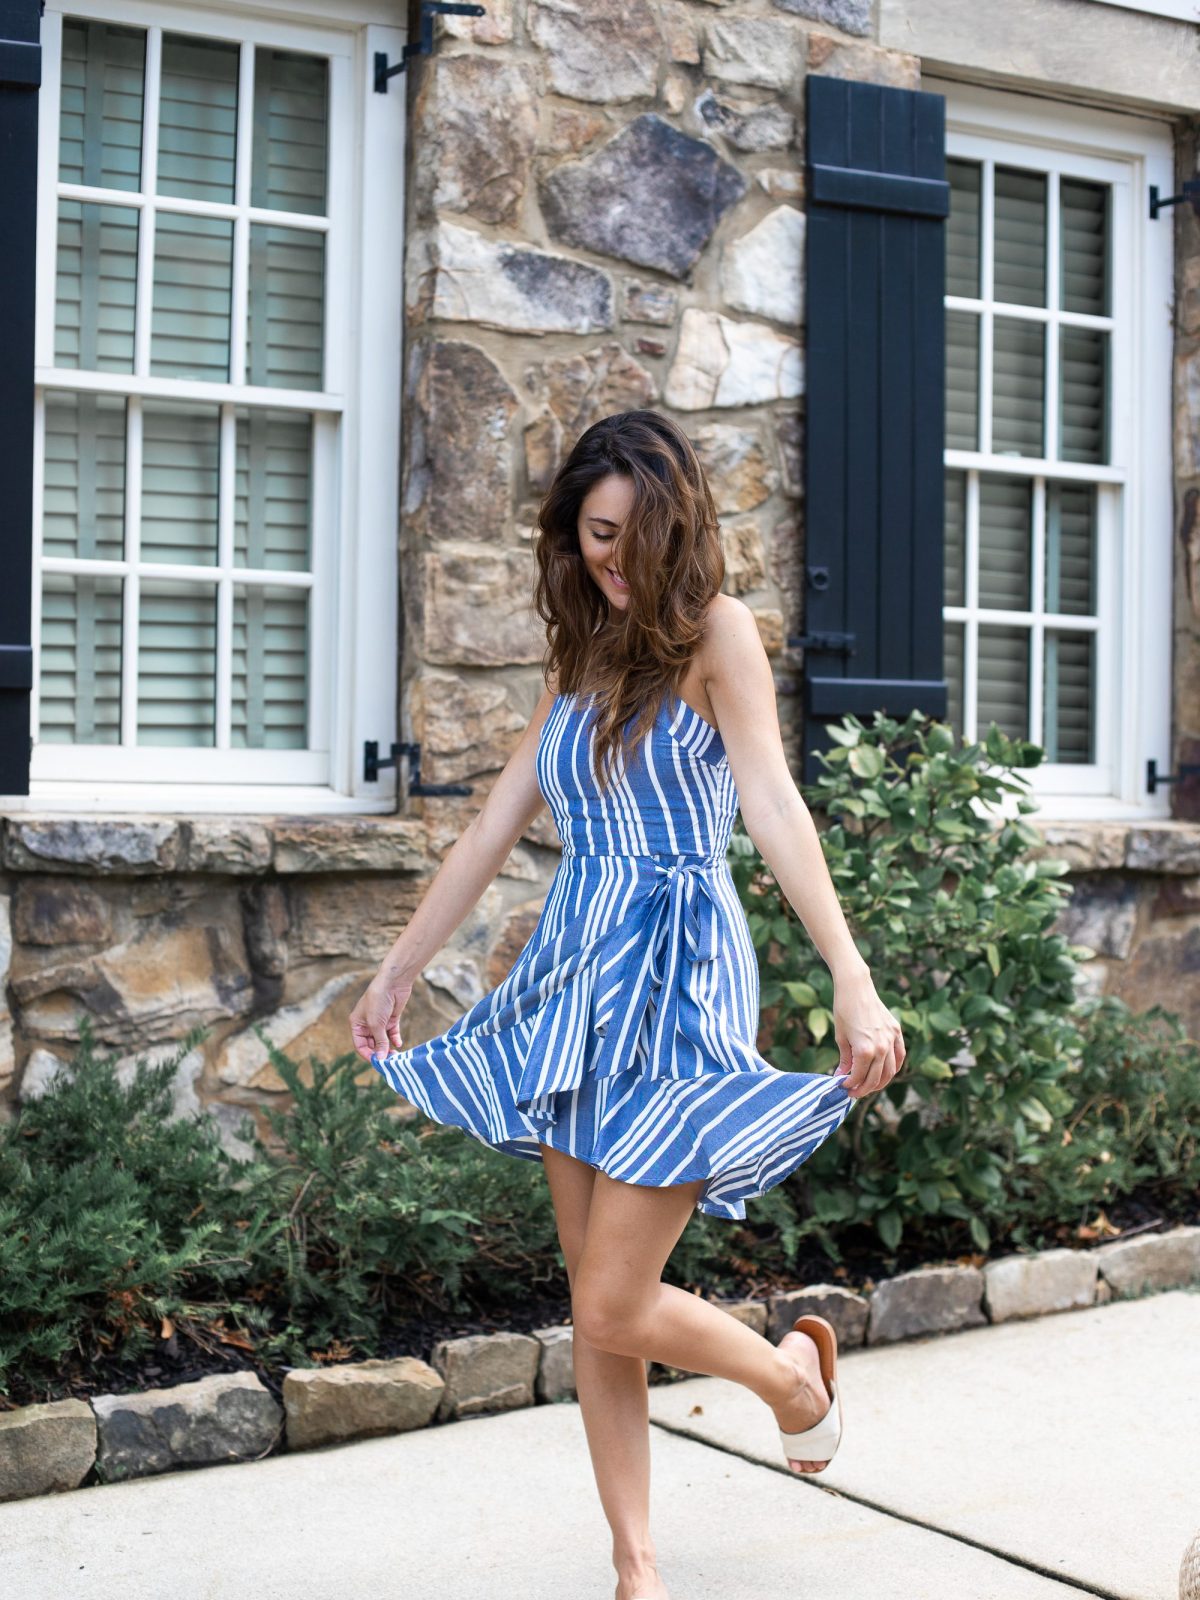 express Striped Square Neck Ruffle Front Wrap Dress, blue striped dress, summer outfit ideas, feminine summer outfit ideas, what to wear in the summer